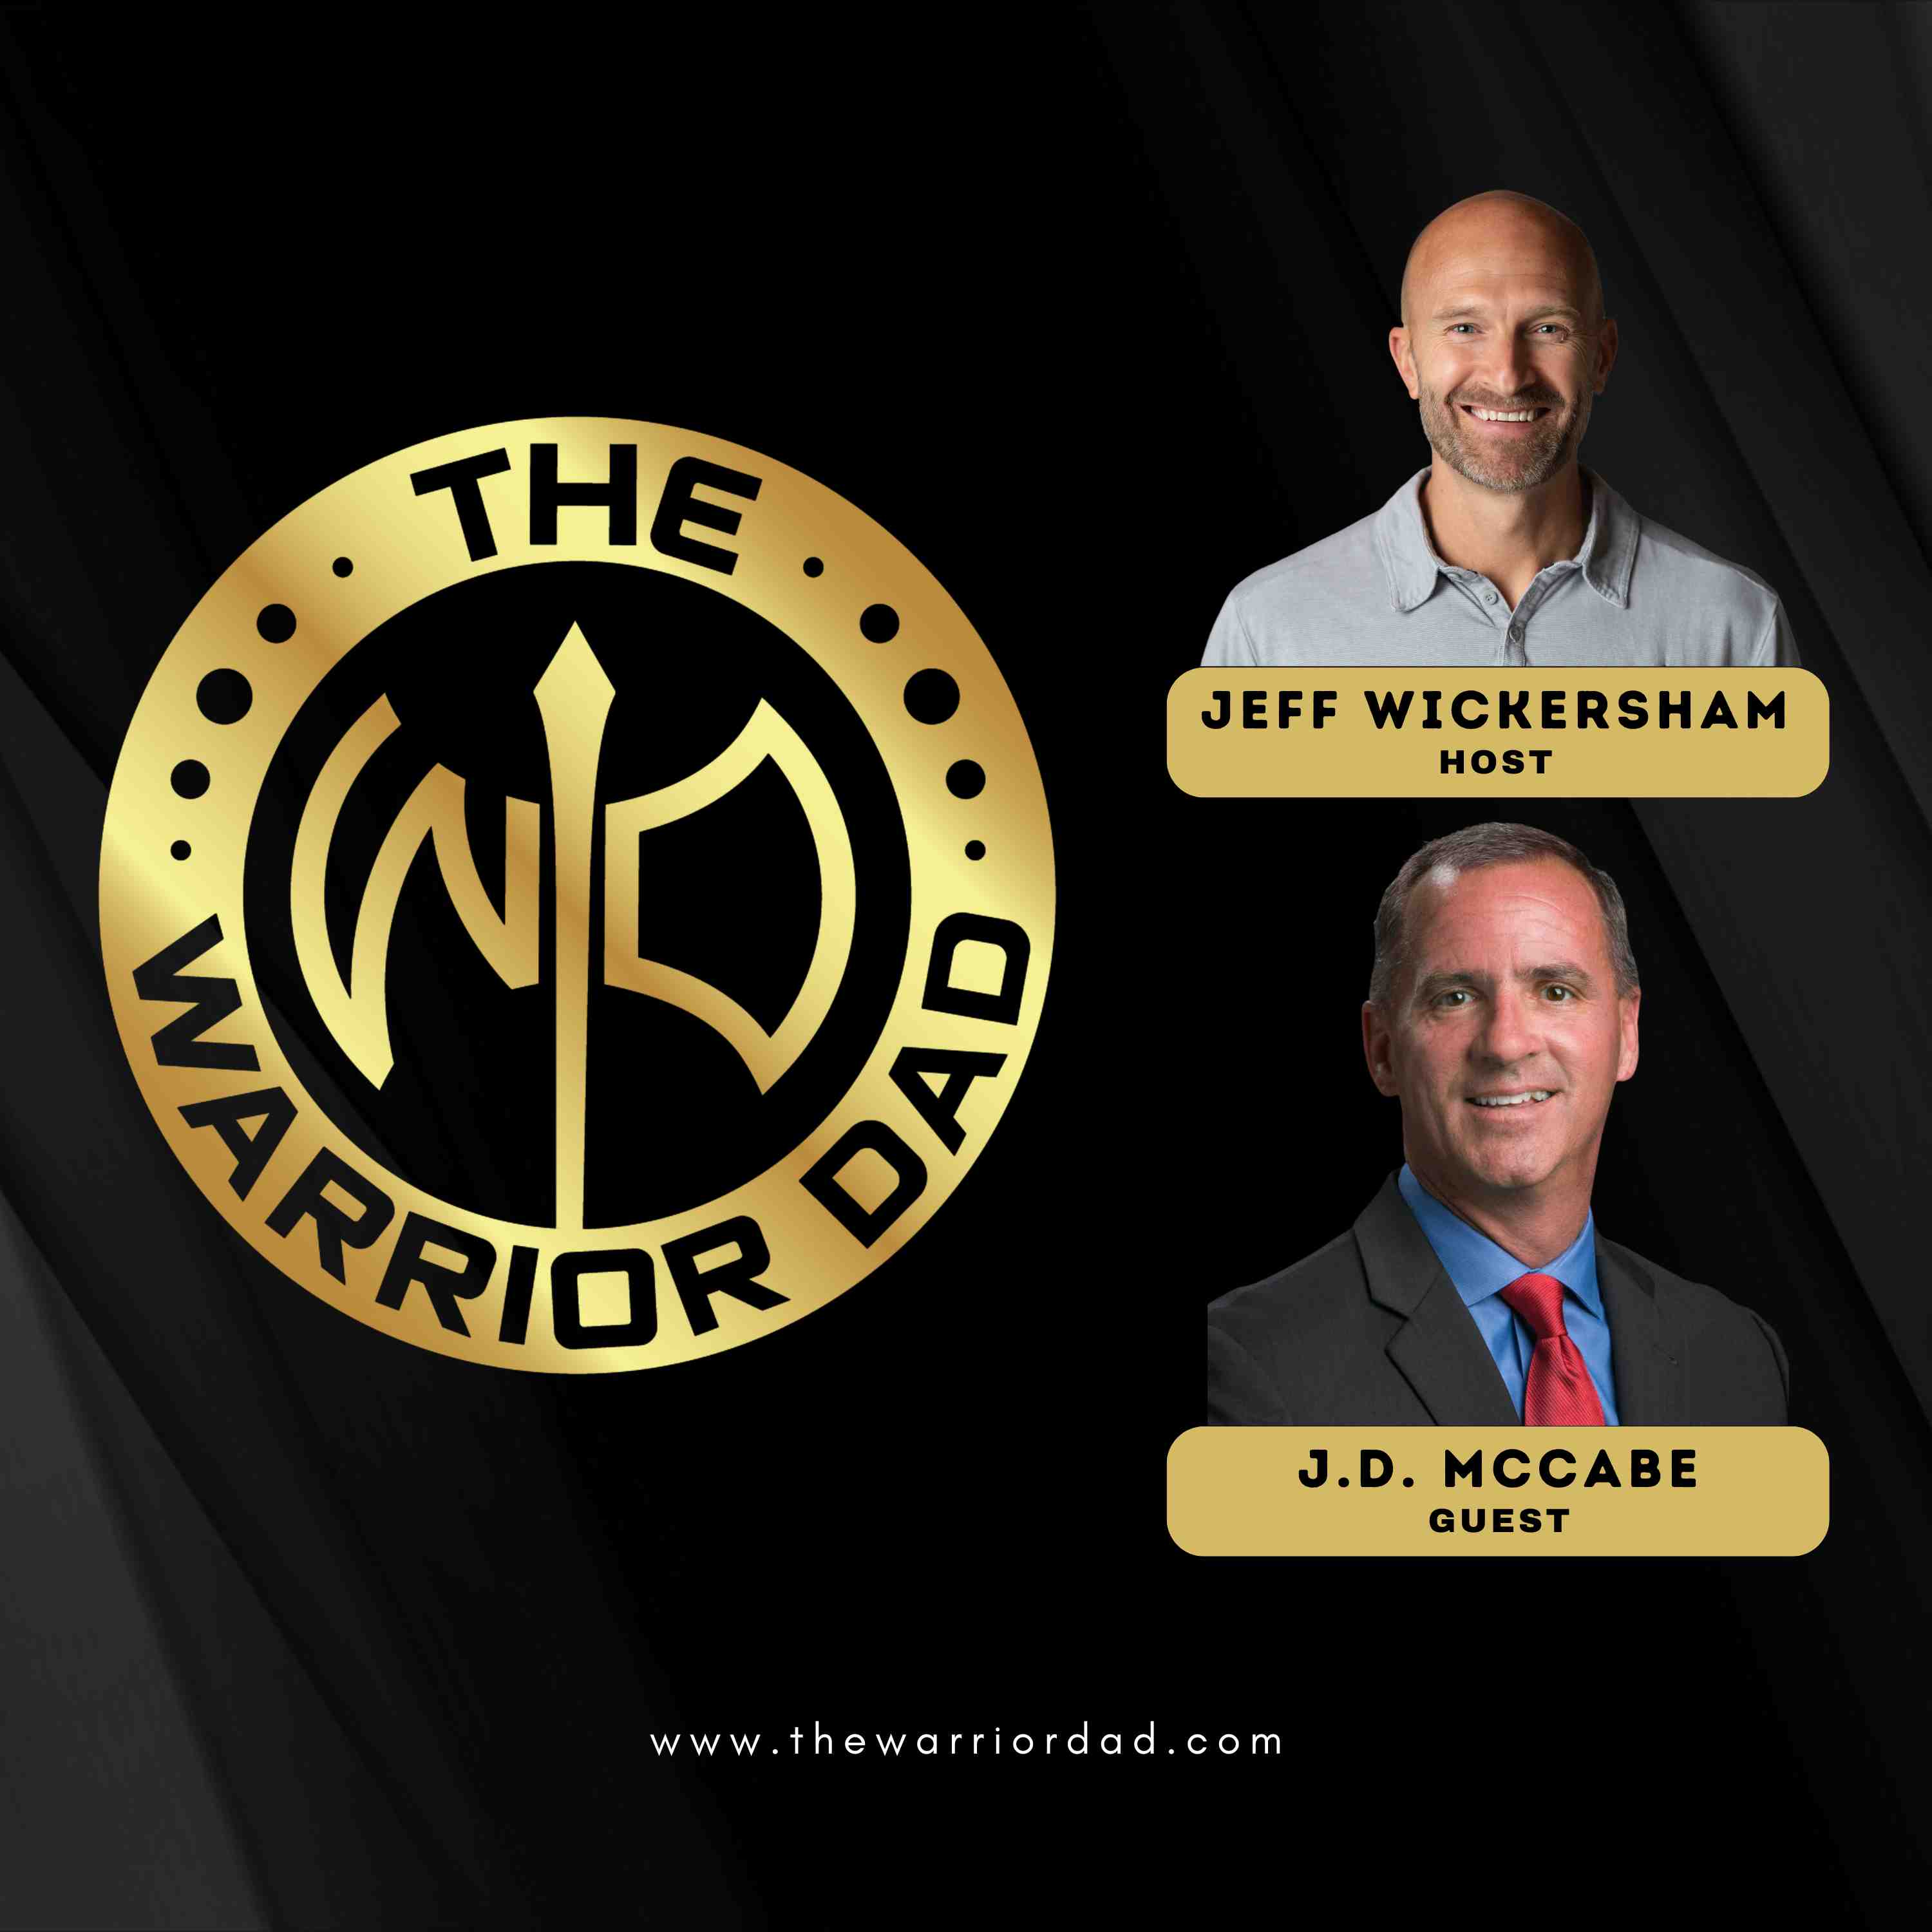 Seizing the opportunity to lead by example through adversity with your kids with J.D. McCabe